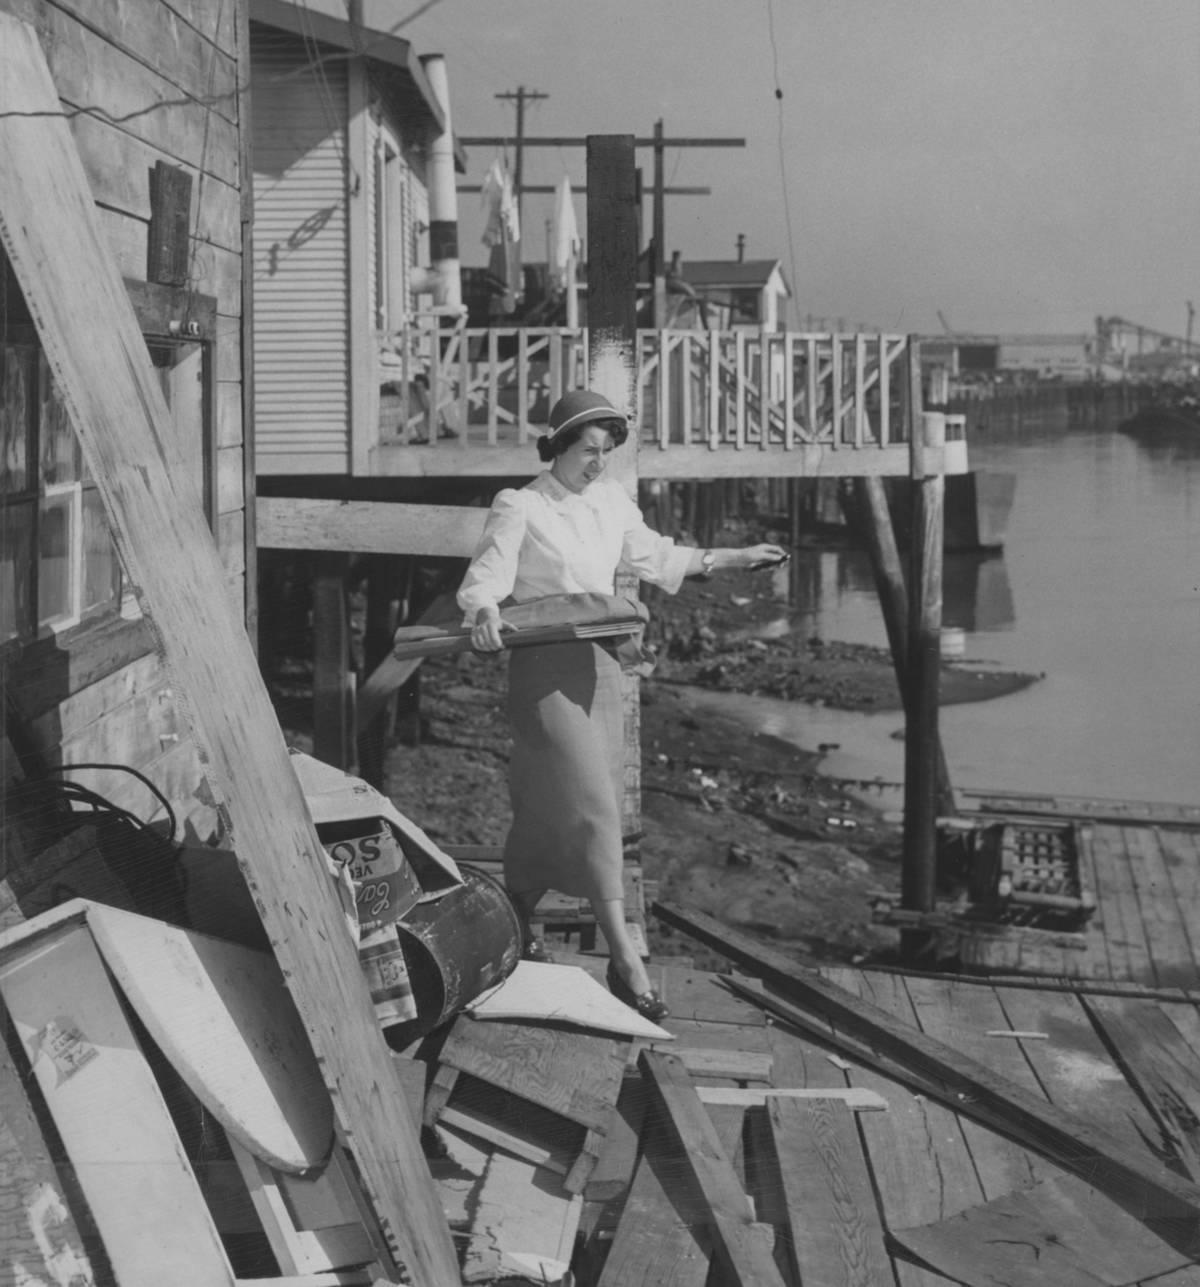 <p>Before the United States Census was mailed to each American household, or the internet was up and running, people would walk door-to-door, counting heads to determine the population in each state. </p> <p>In this case, United States Census taker Marjorie Kelso of Oakland, California, was captured via photograph walking among the docks of the ark community of houseboats off Alameda Avenue. Tucked into her side is a large book, where she will tally the heads living in each household.</p>